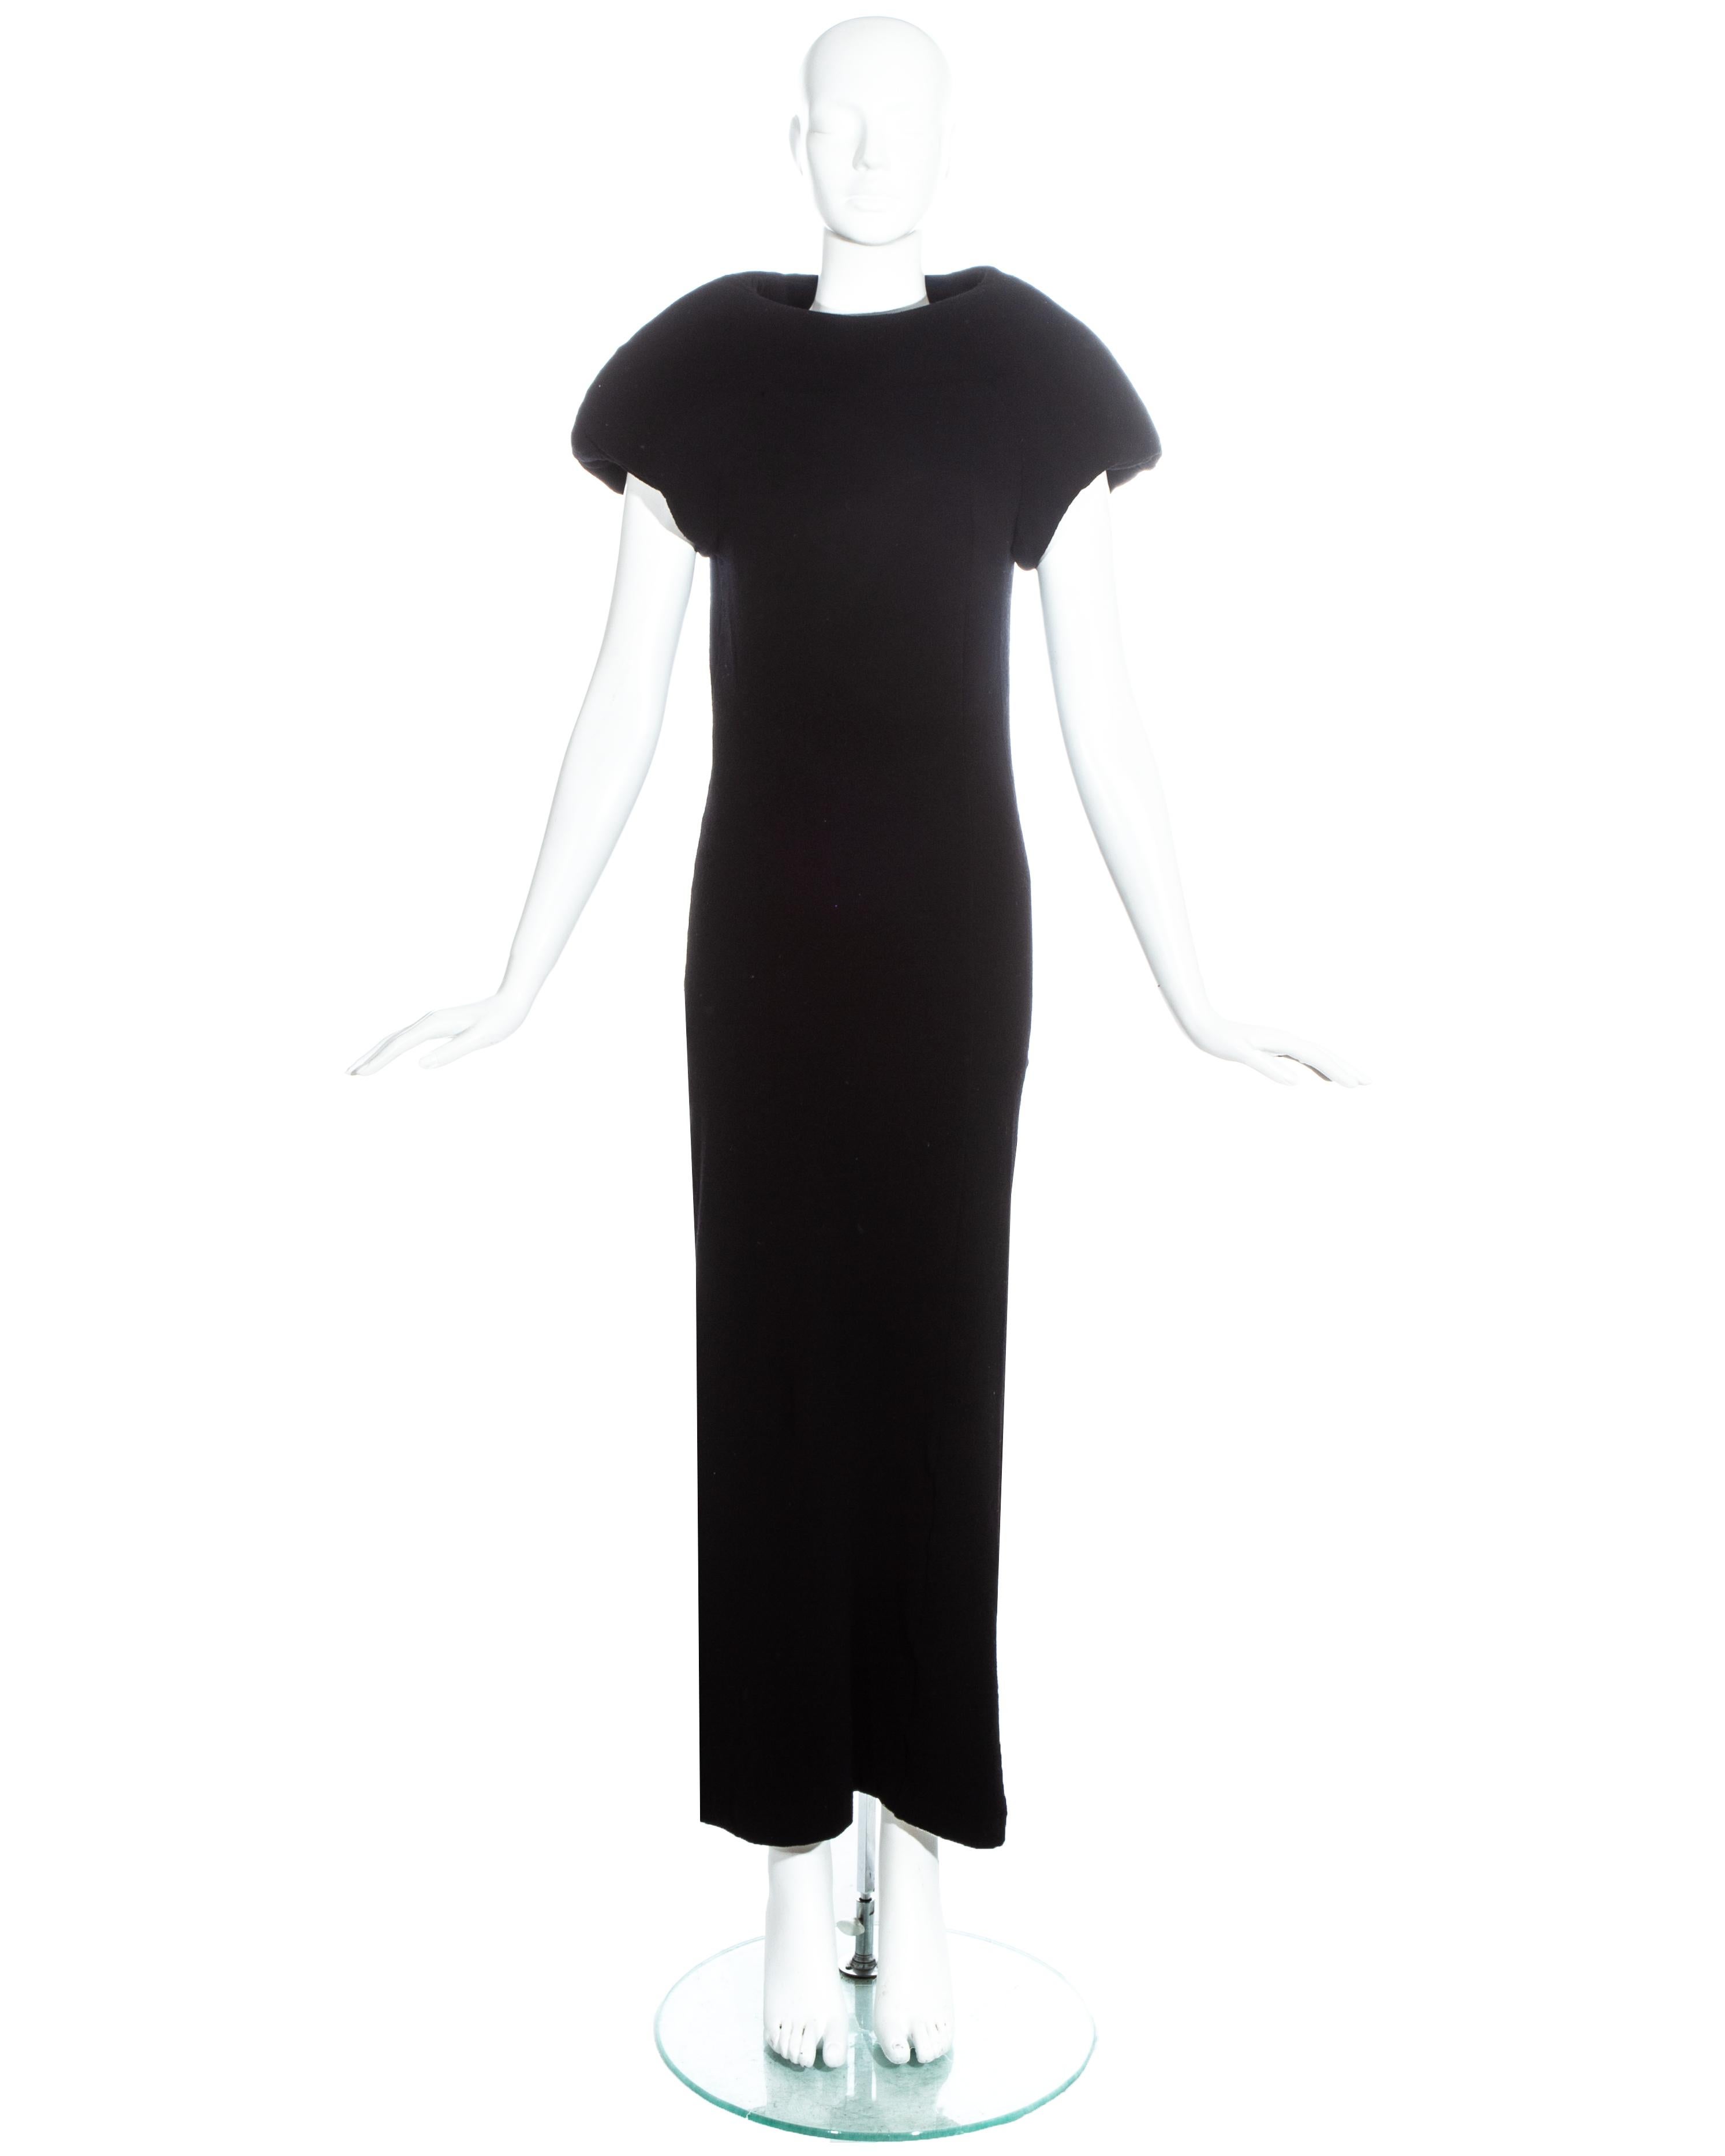 Comme des Garcons black wool and nylon blend maxi dress with polyester padding around the shoulders -  a signature look of the 'Body Meets Dress / Dress Meets Body' collection.

Spring-Summer 1997